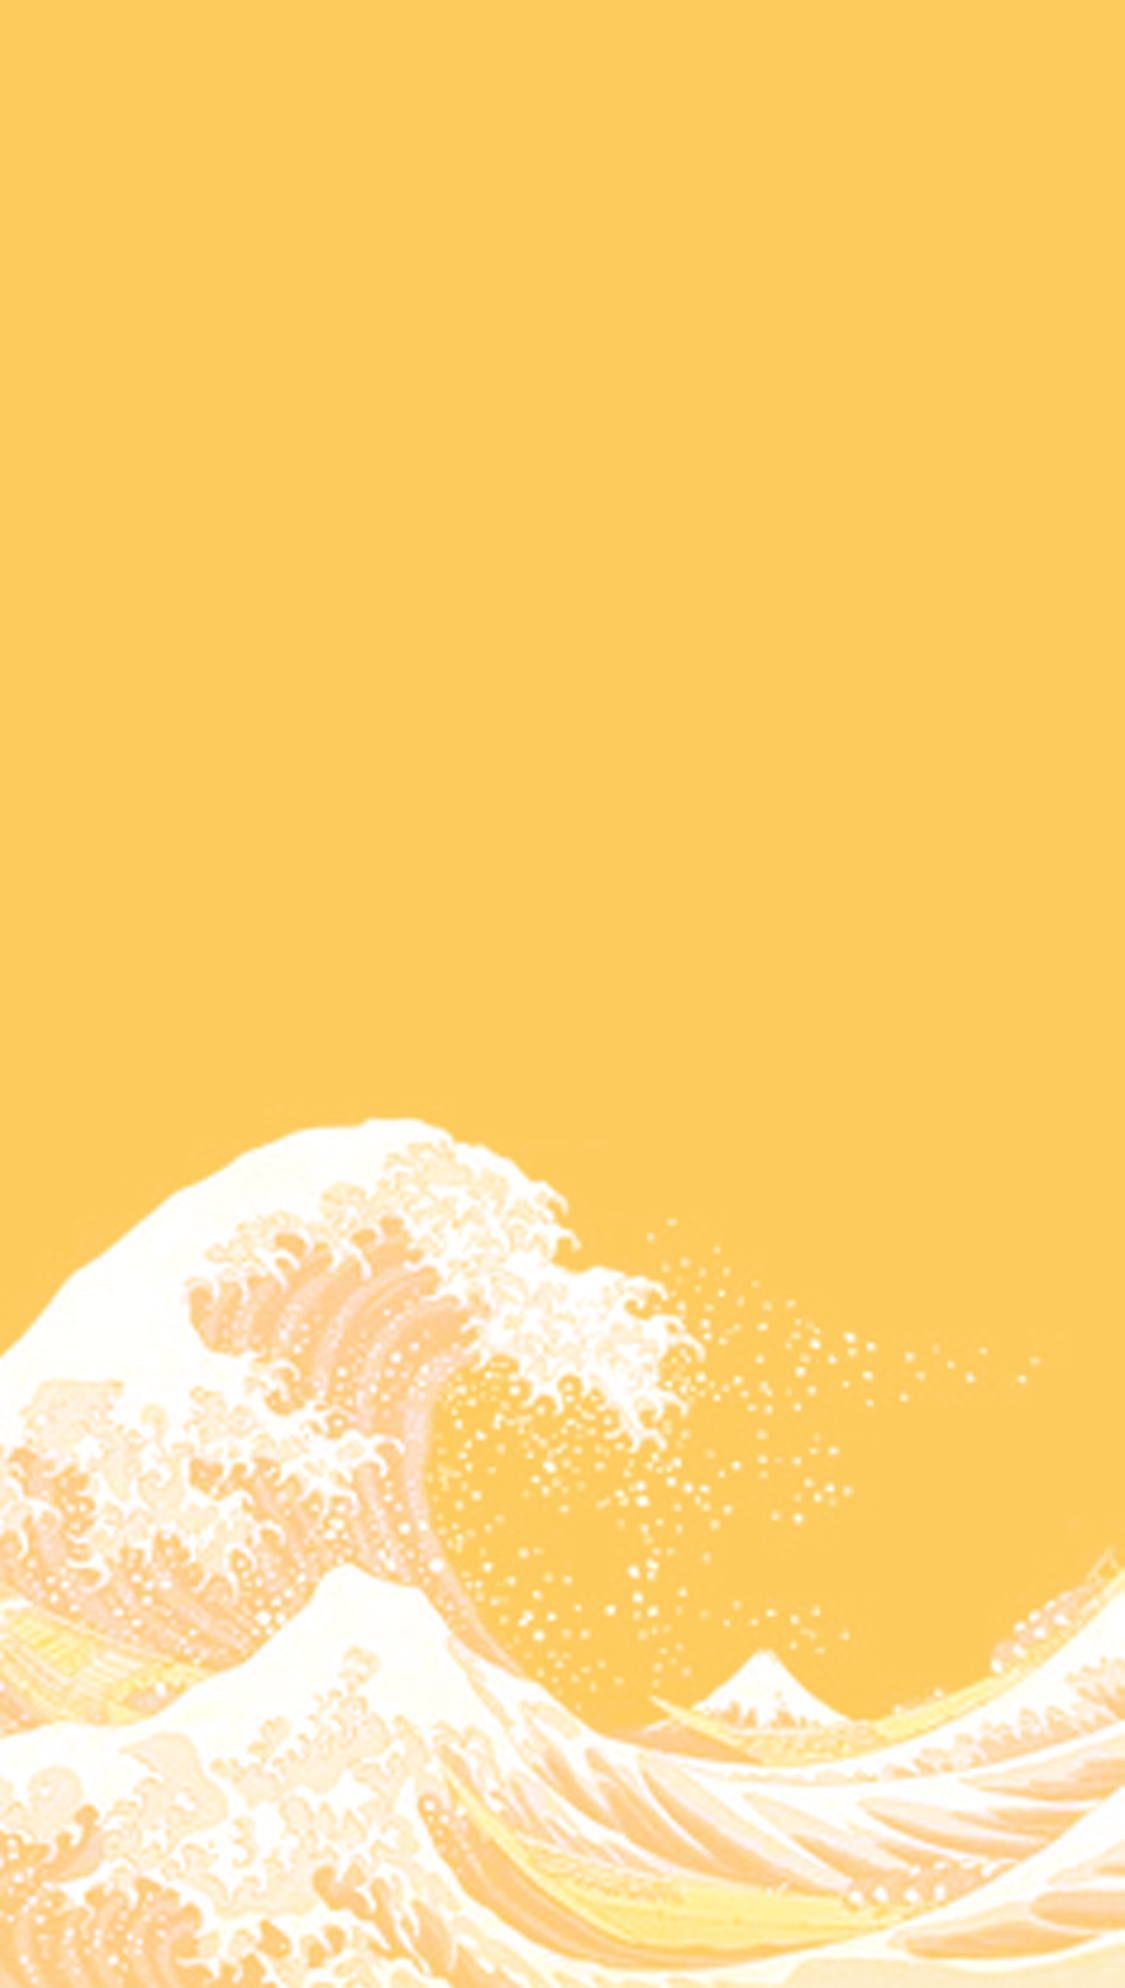 Aesthetic phone background of a yellow wave - Yellow, yellow iphone, pastel yellow, light yellow, The Great Wave off Kanagawa